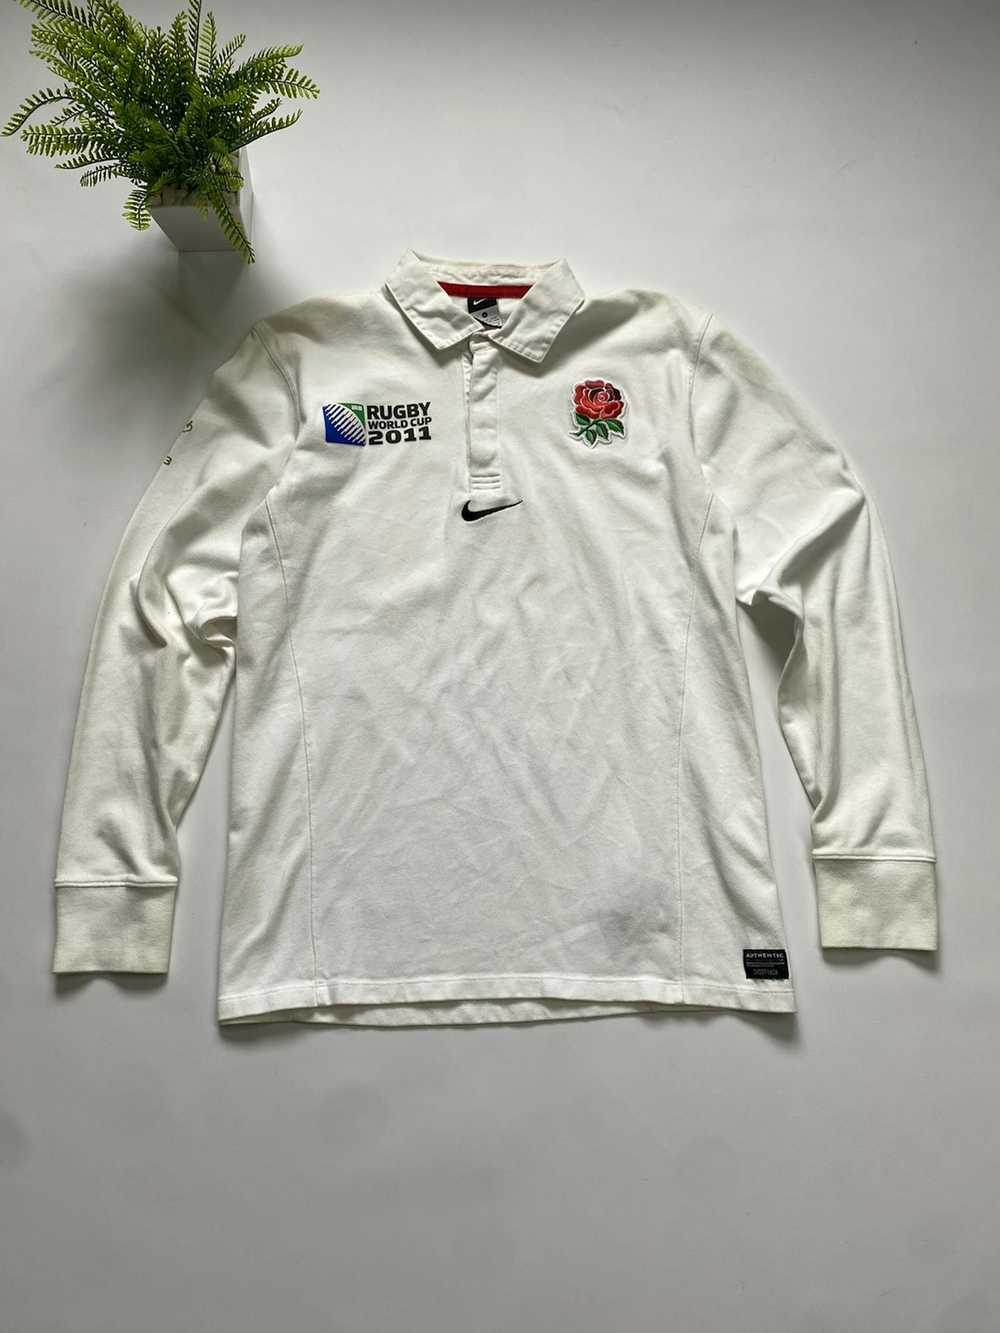 England Rugby League × Nike × Vintage Nike Rugby … - image 1